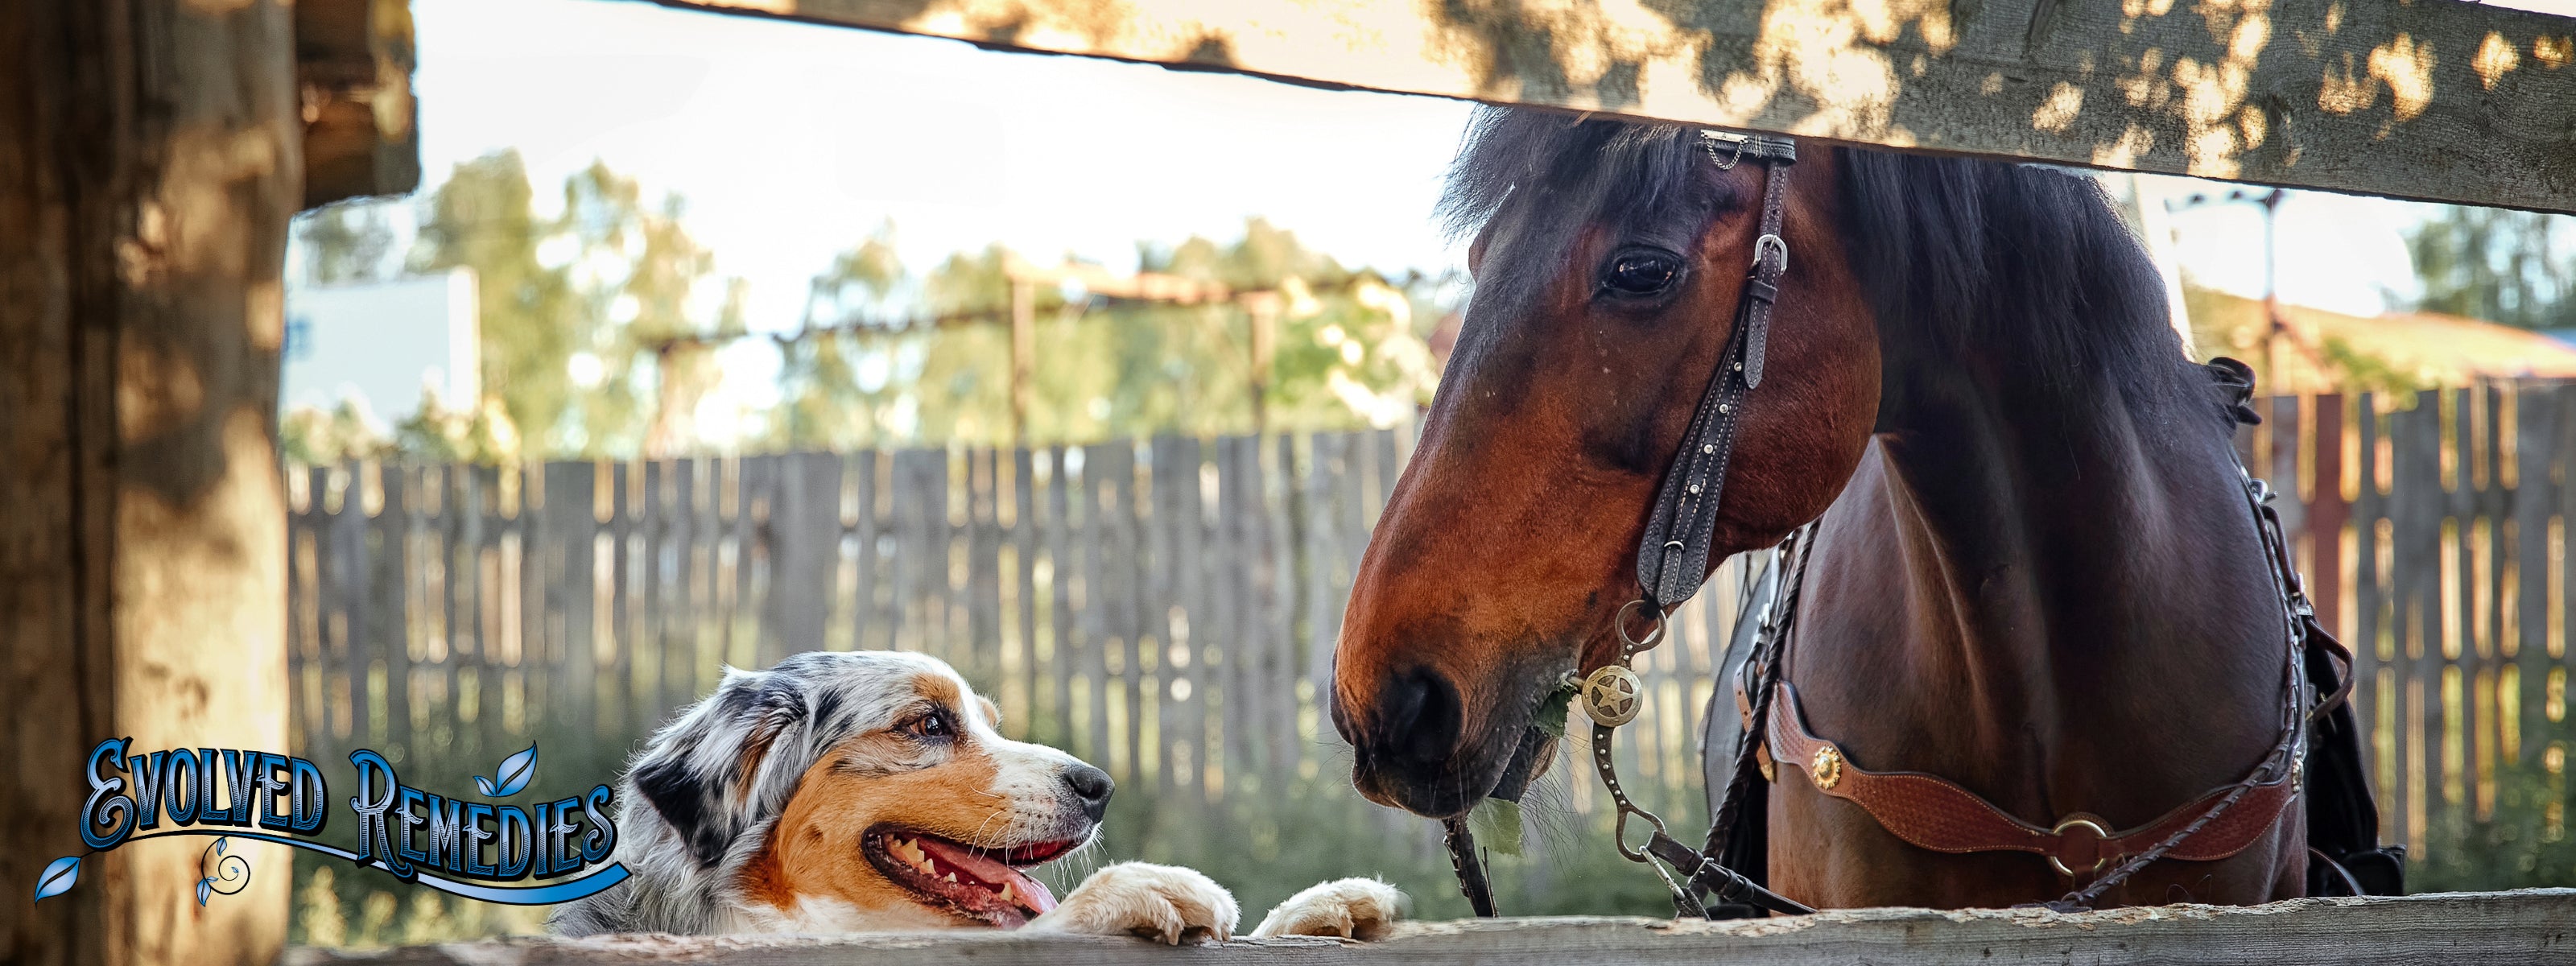 Happy healthy dog and horse thriving on Evolved Remedies superfood supplements for horses and dogs